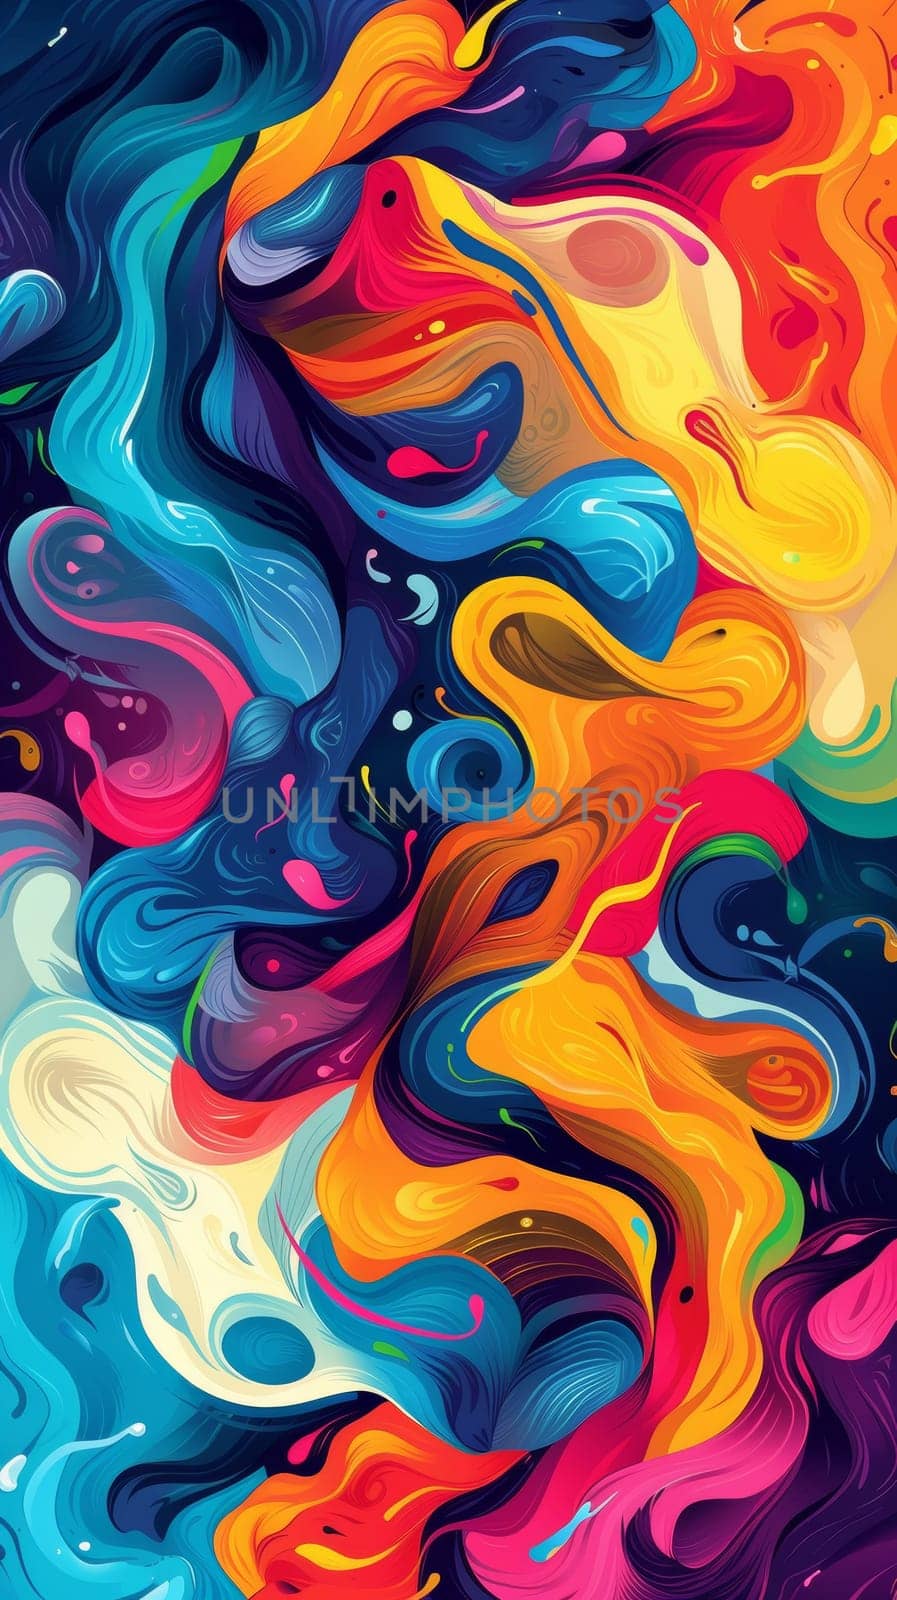 A colorful abstract painting with a lot of different colors